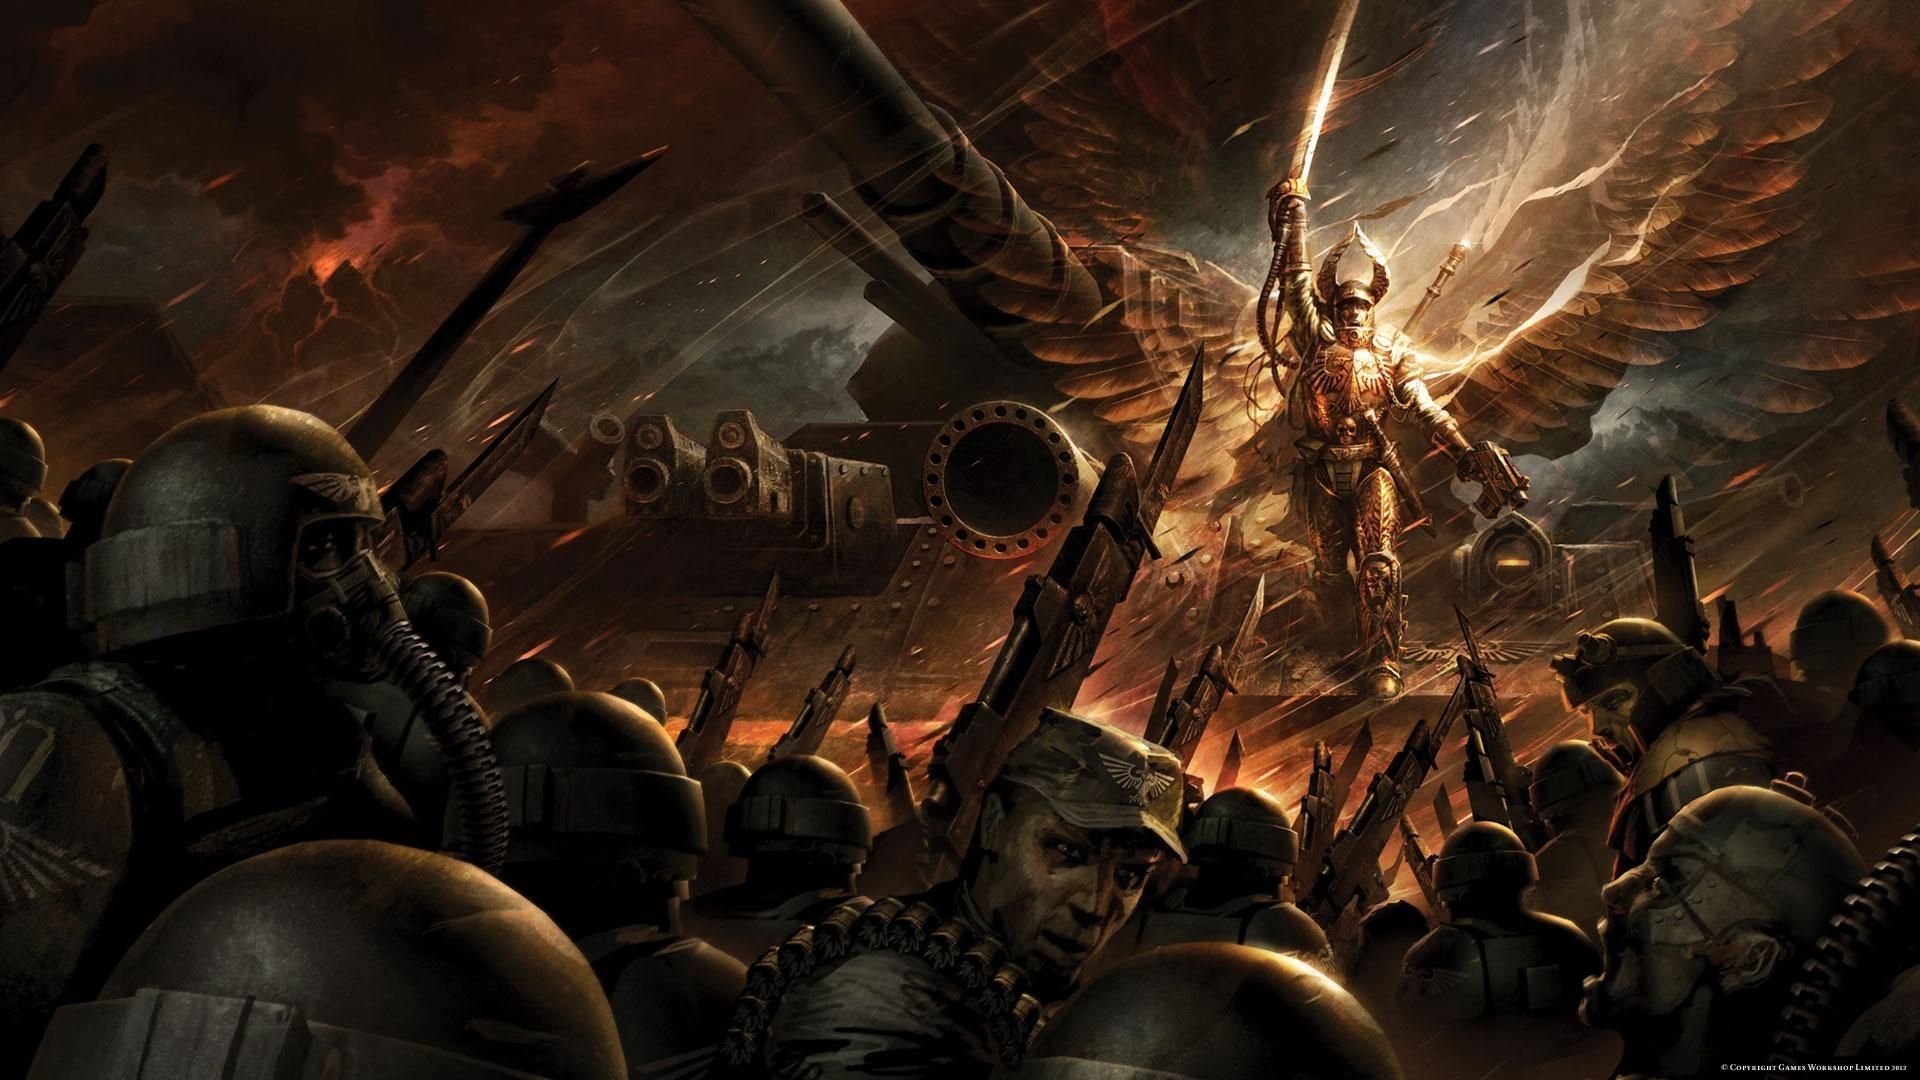 10 New Warhammer 40K Wallpapers 1920X1080 FULL HD 1920×1080 For PC Background